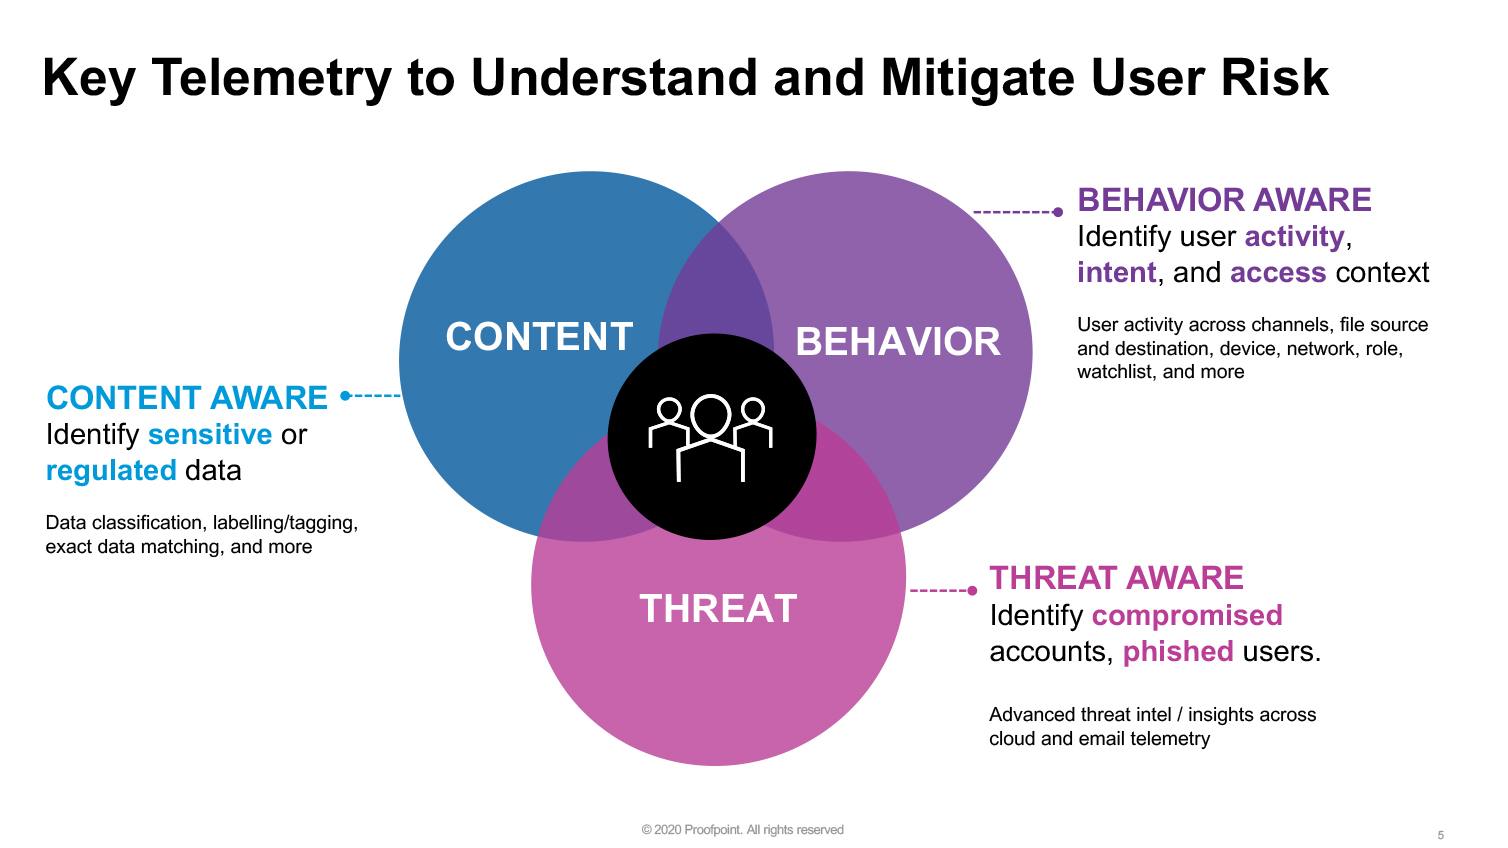 Key Telemetry to Understand and Mitigate User Risk